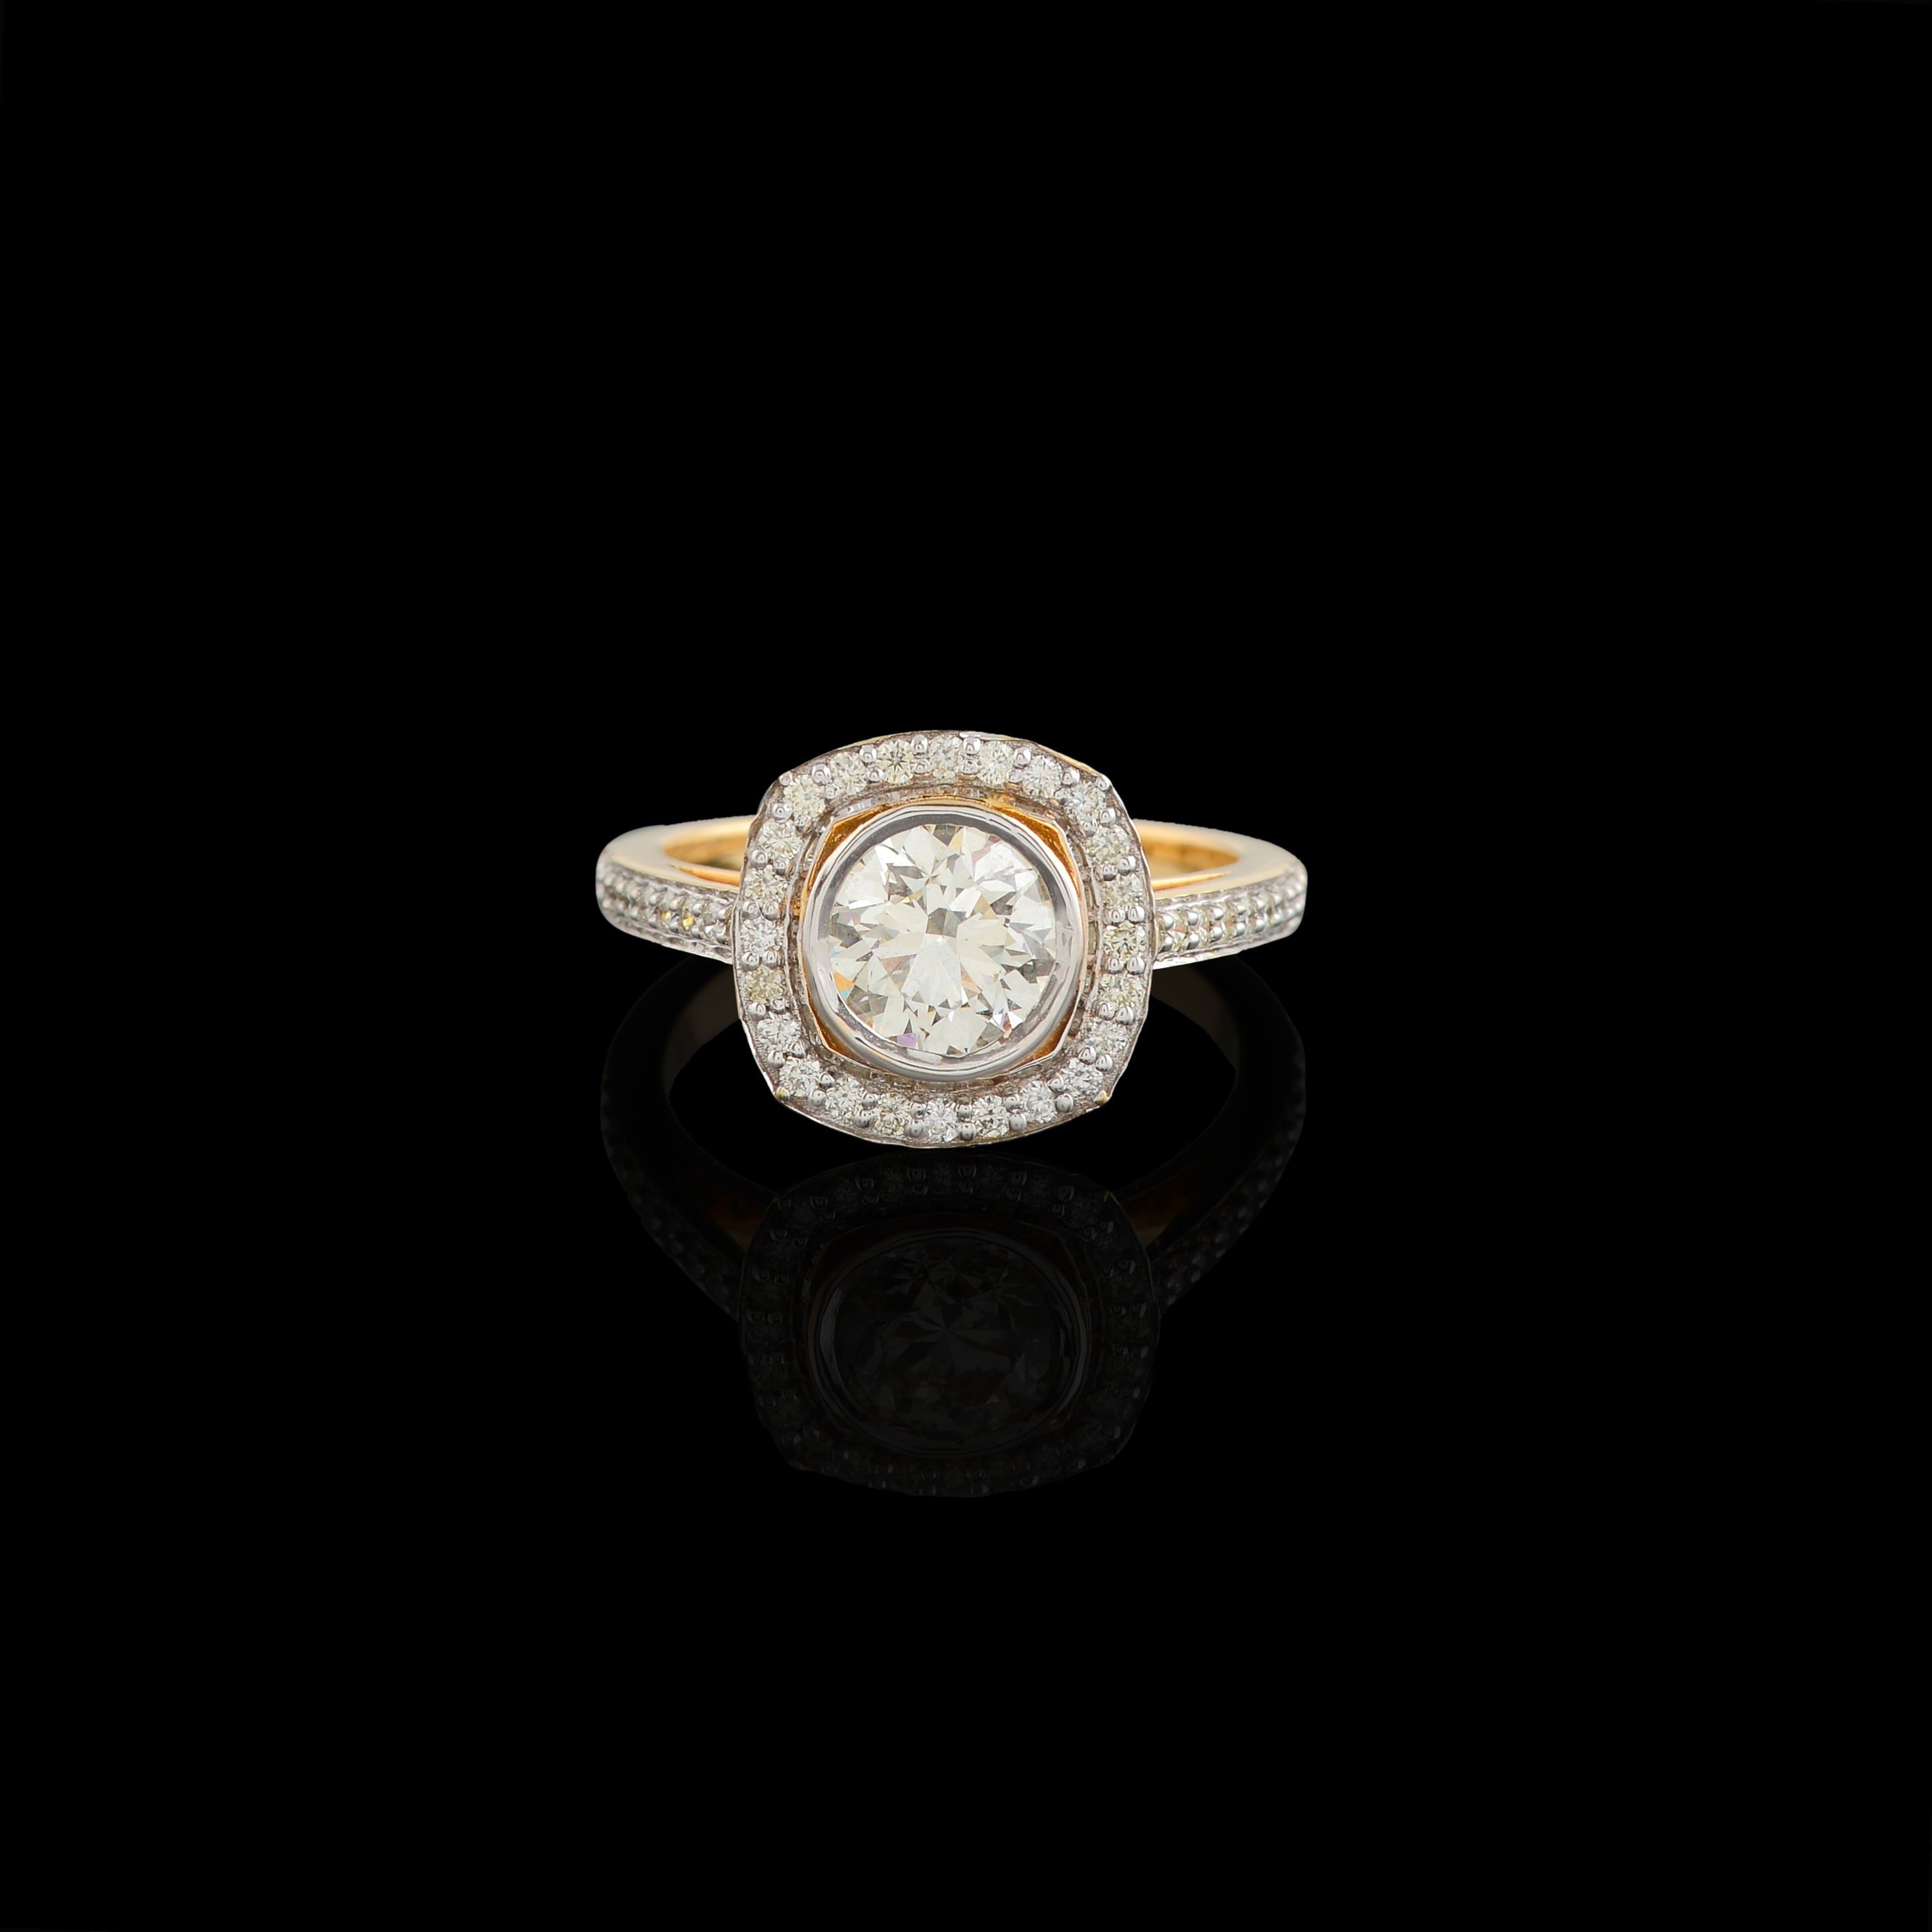 Squaricle Solitaire Diamond Ring